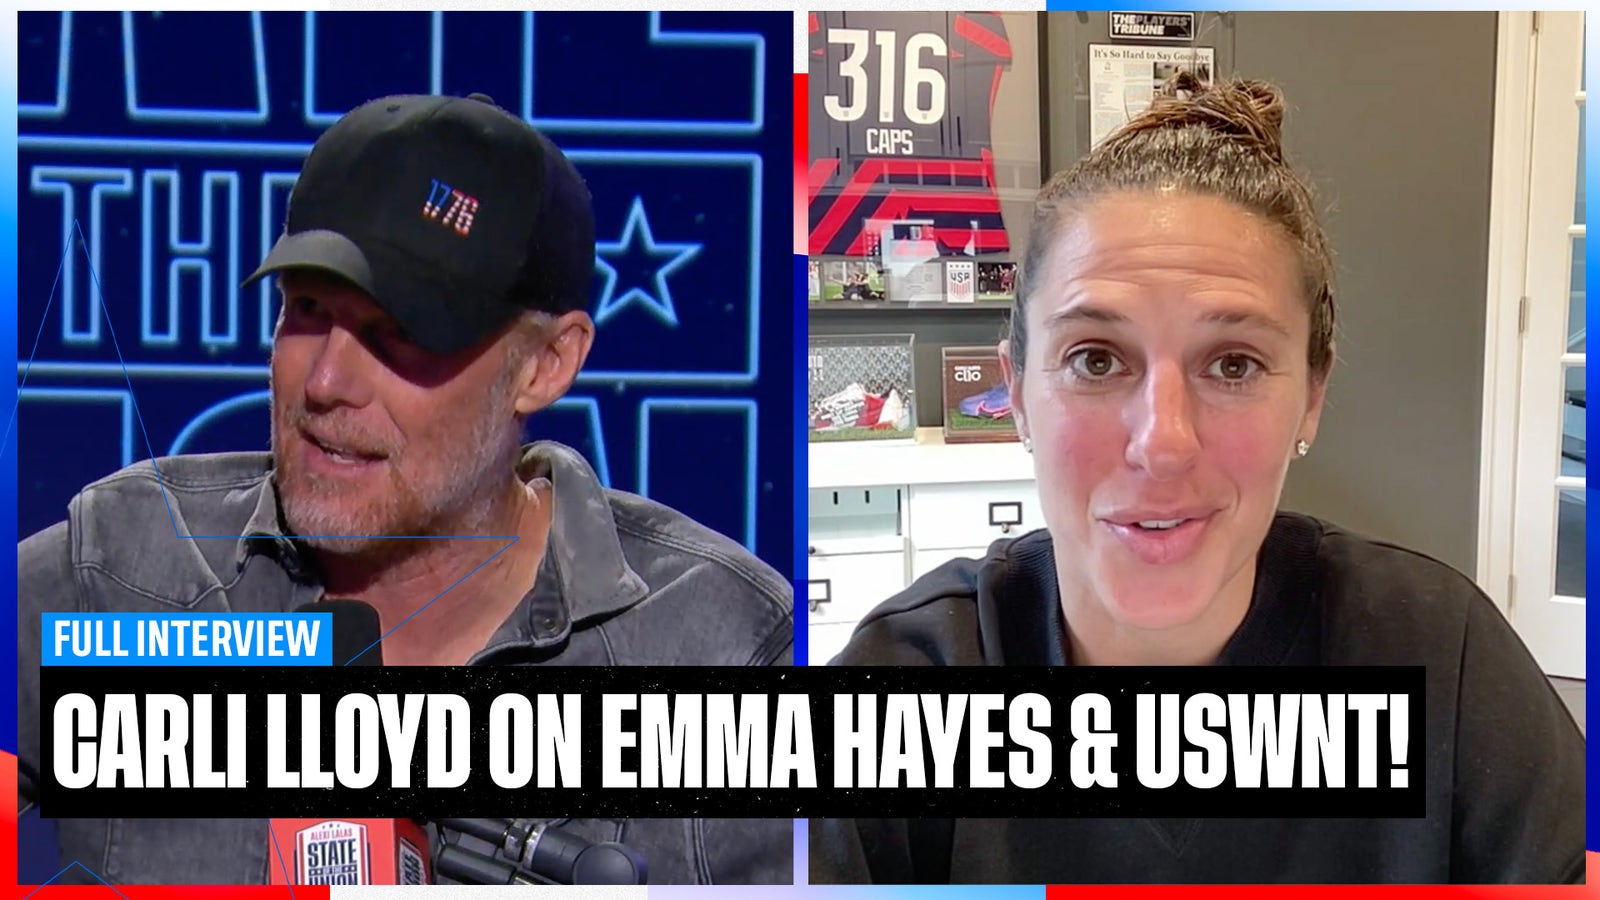 Carli Lloyd on what Emma Hayes will bring to USWNT